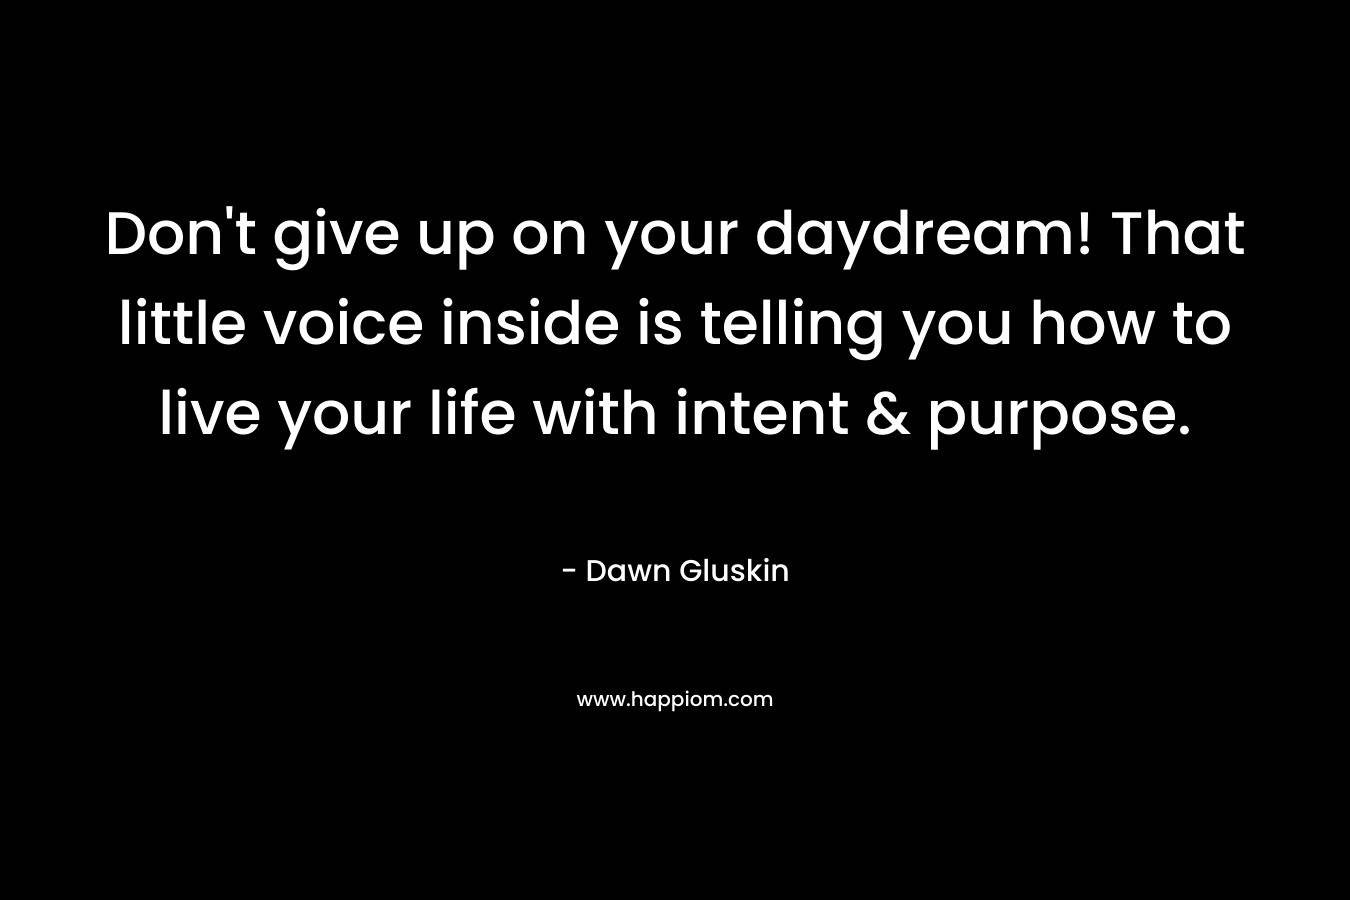 Don’t give up on your daydream! That little voice inside is telling you how to live your life with intent & purpose. – Dawn Gluskin